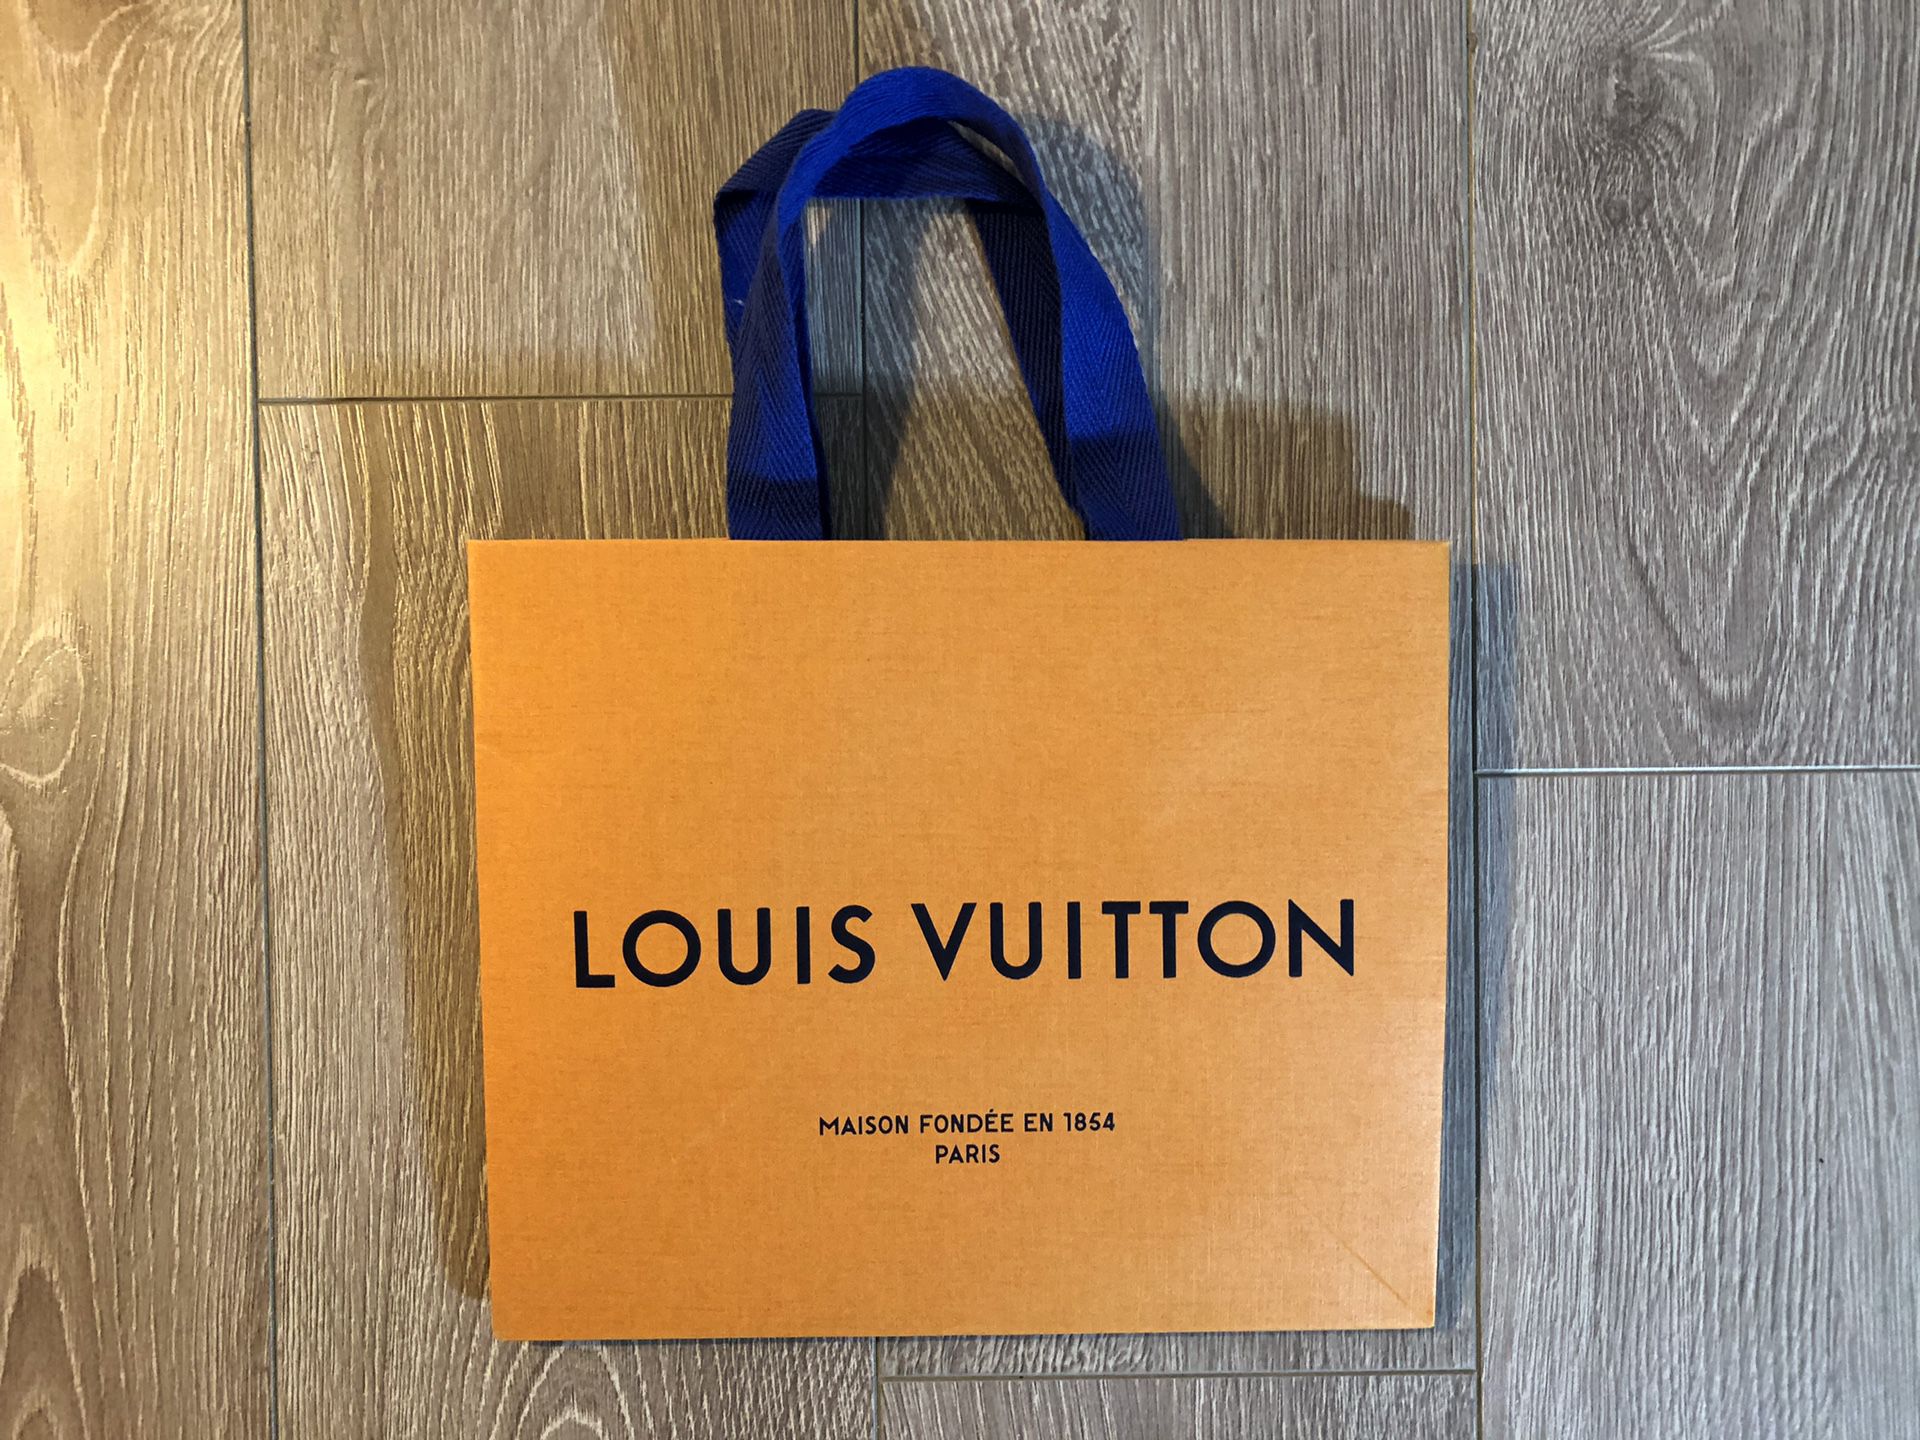 Louis Vuitton Box and Shopping bag for Sale in Monterey Park, CA